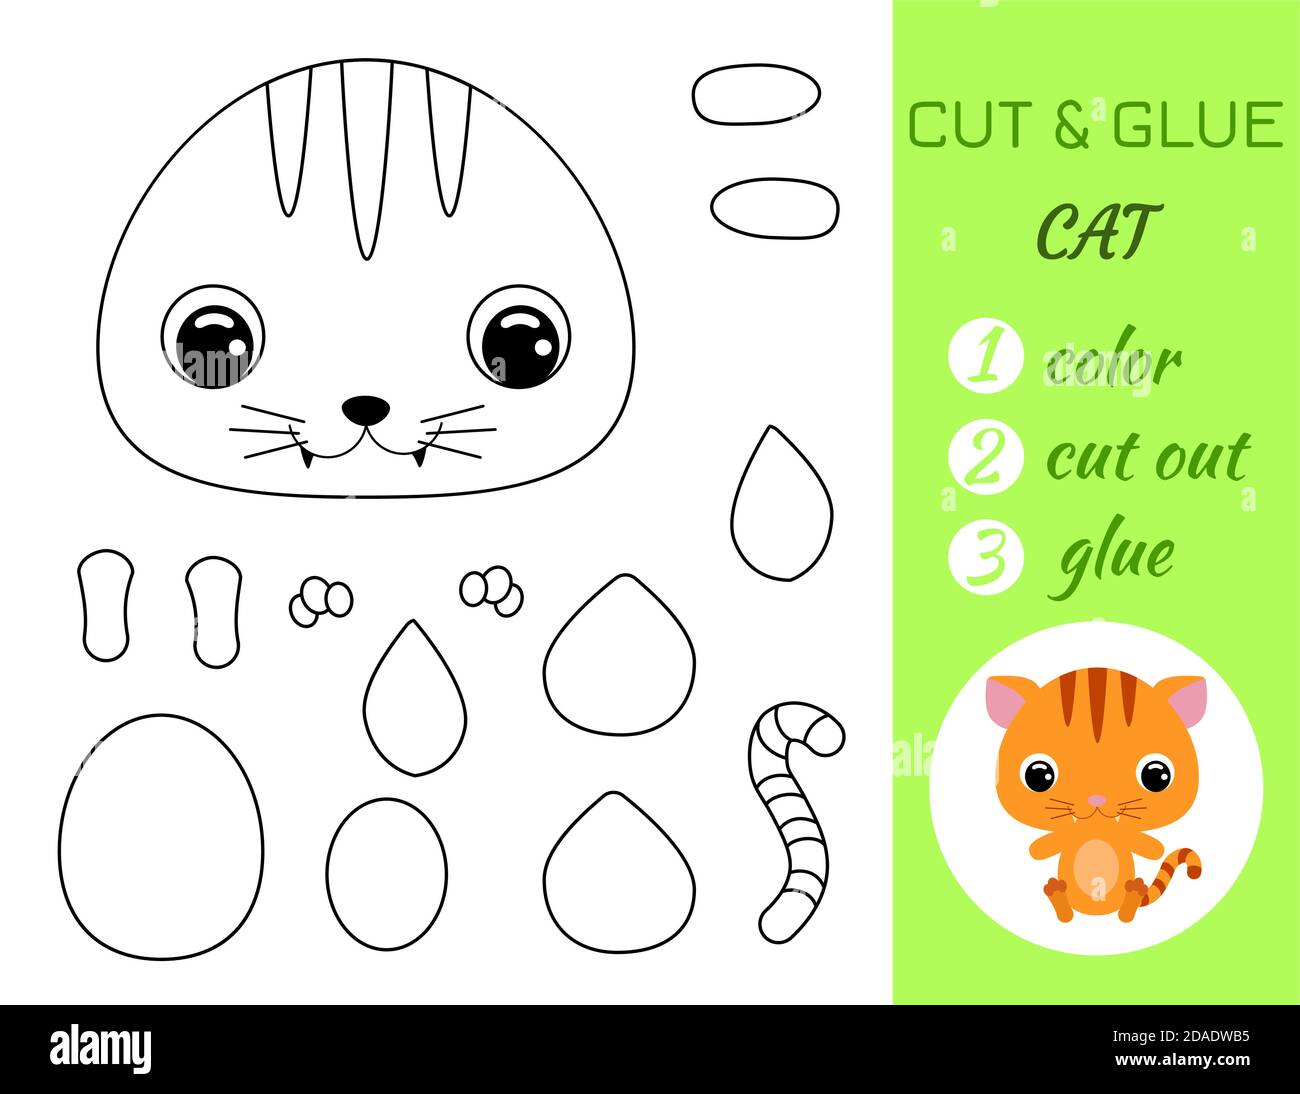 Cut For Cat  Play Cut For Cat on PrimaryGames